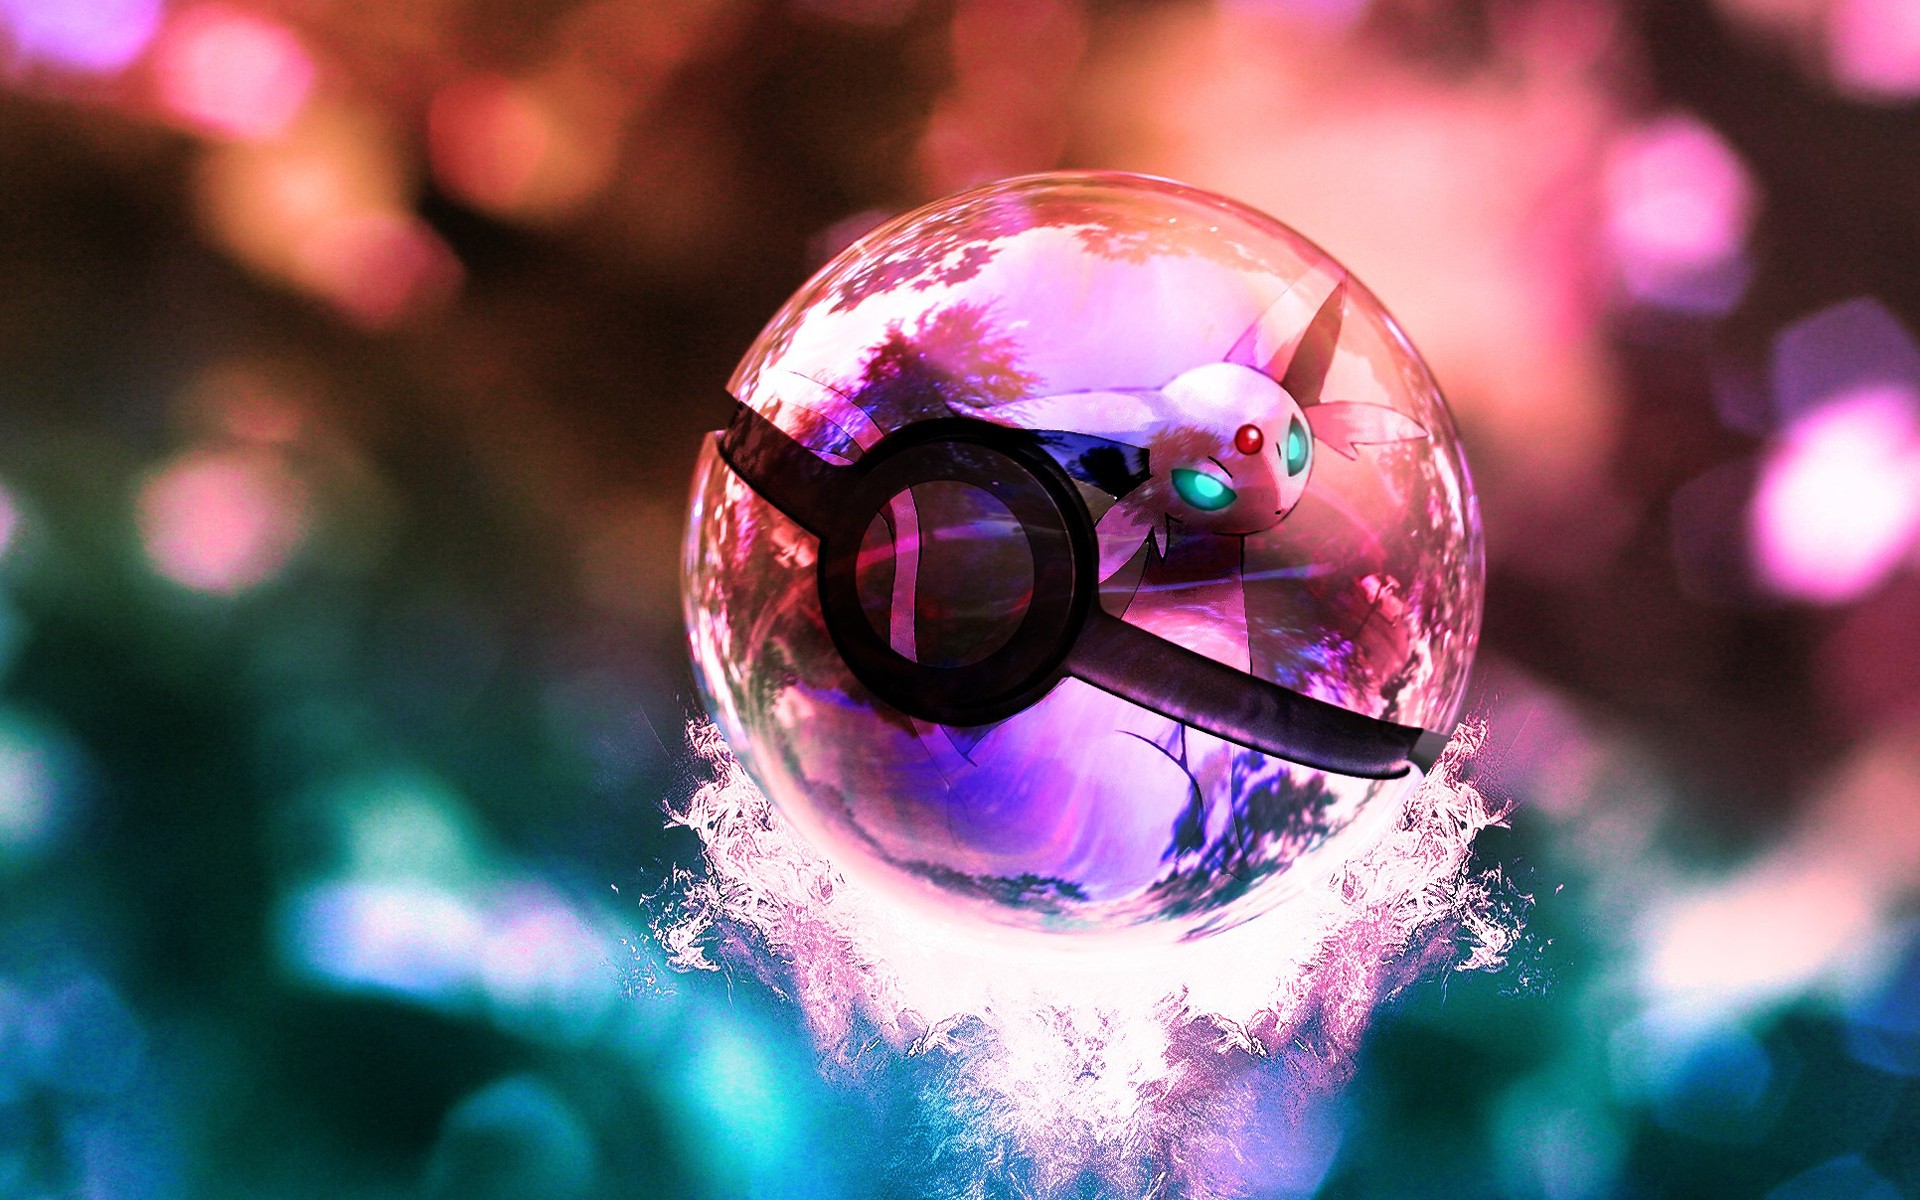 Awesome Pokemon Backgrounds 18261 1920x1200 px